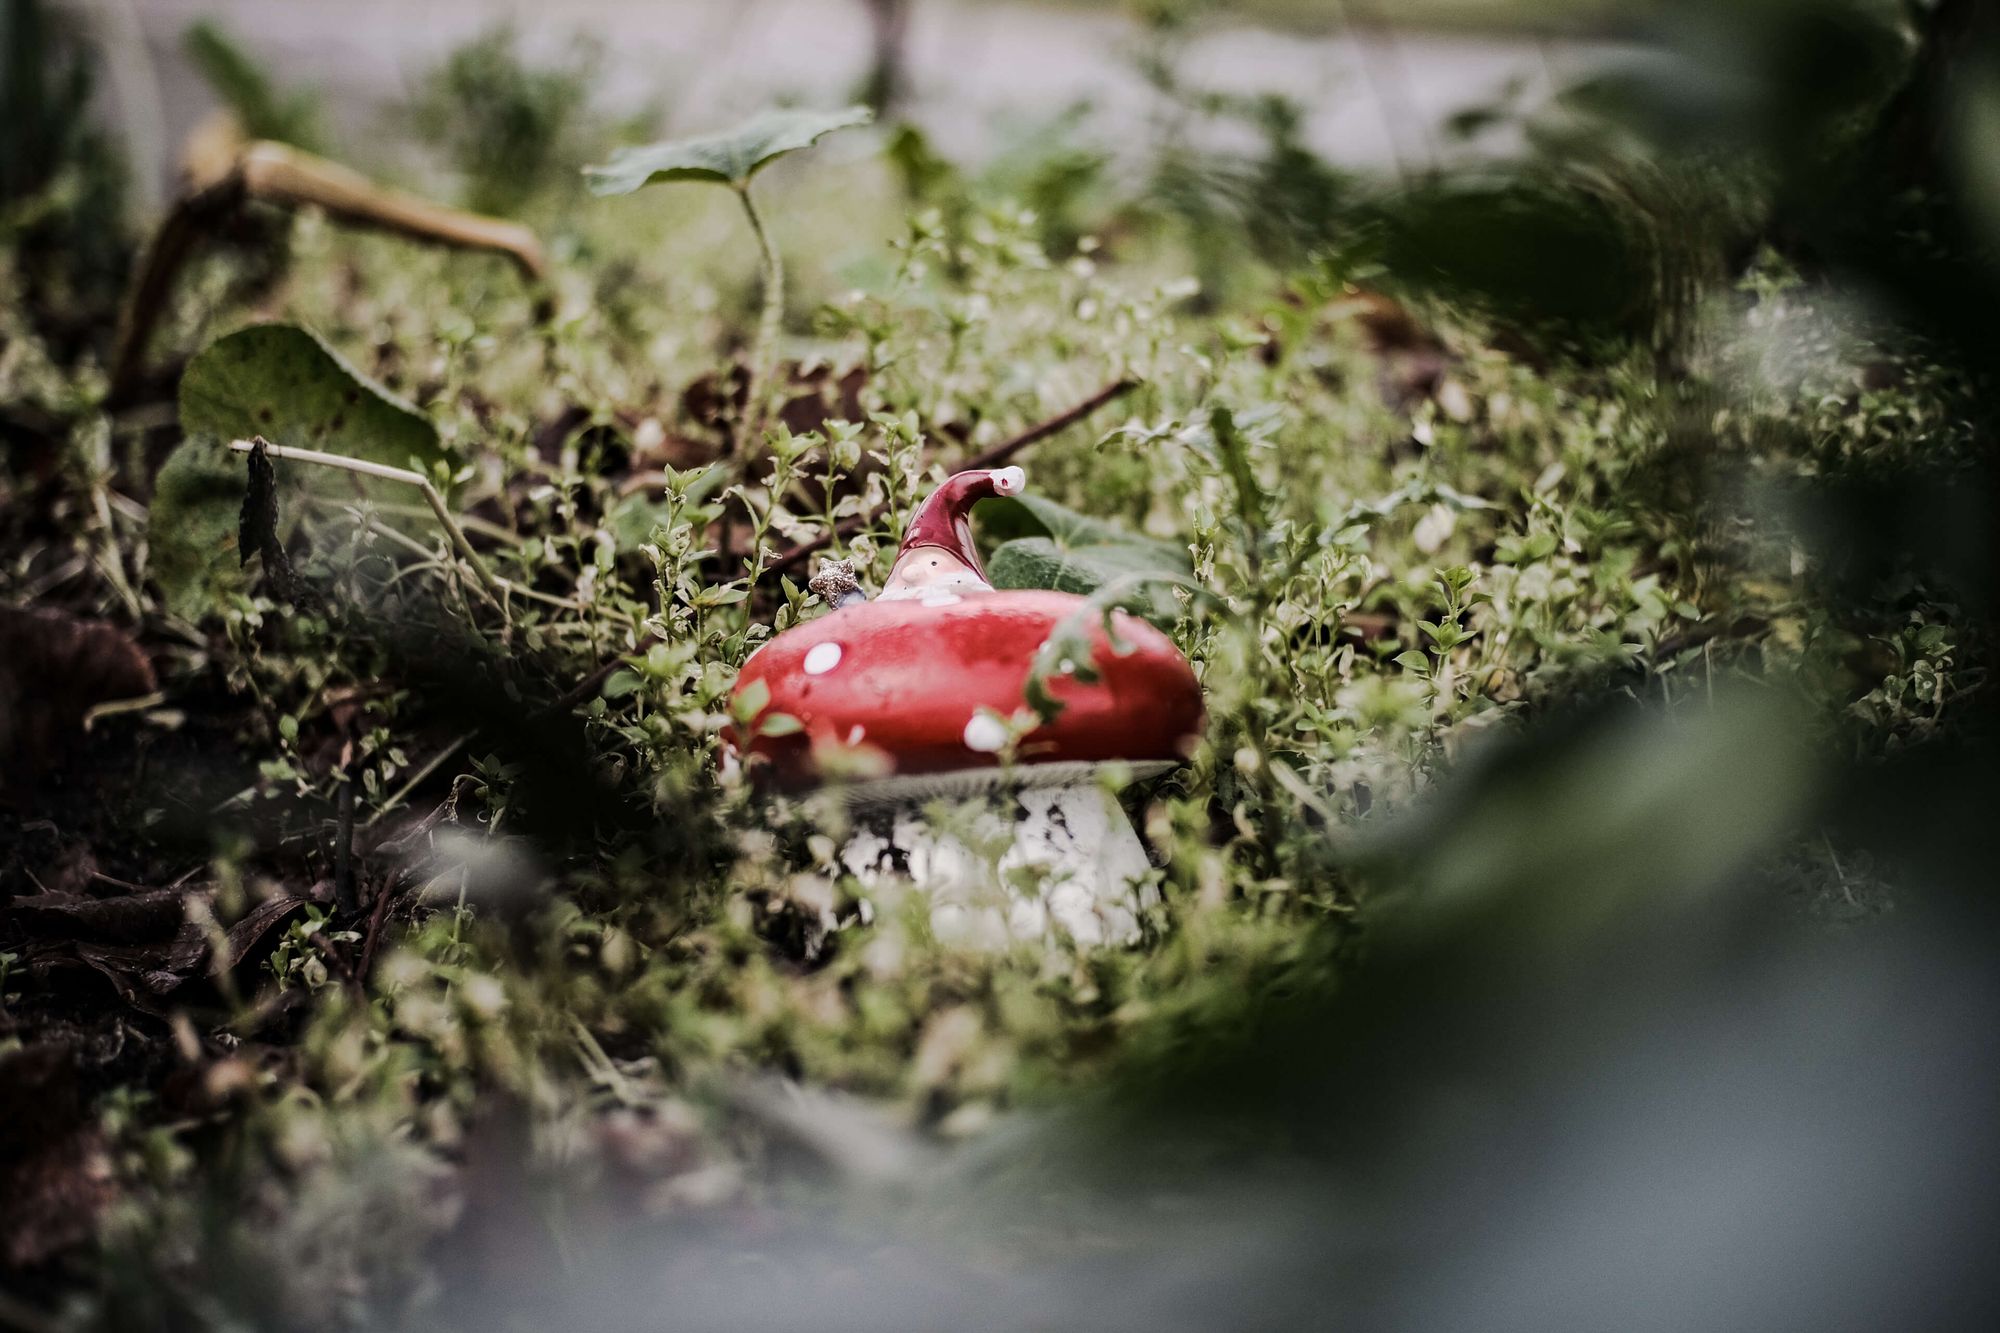 a close up of a tiny mushroom and gnome that somebody stuck between the foliage on the side of the road